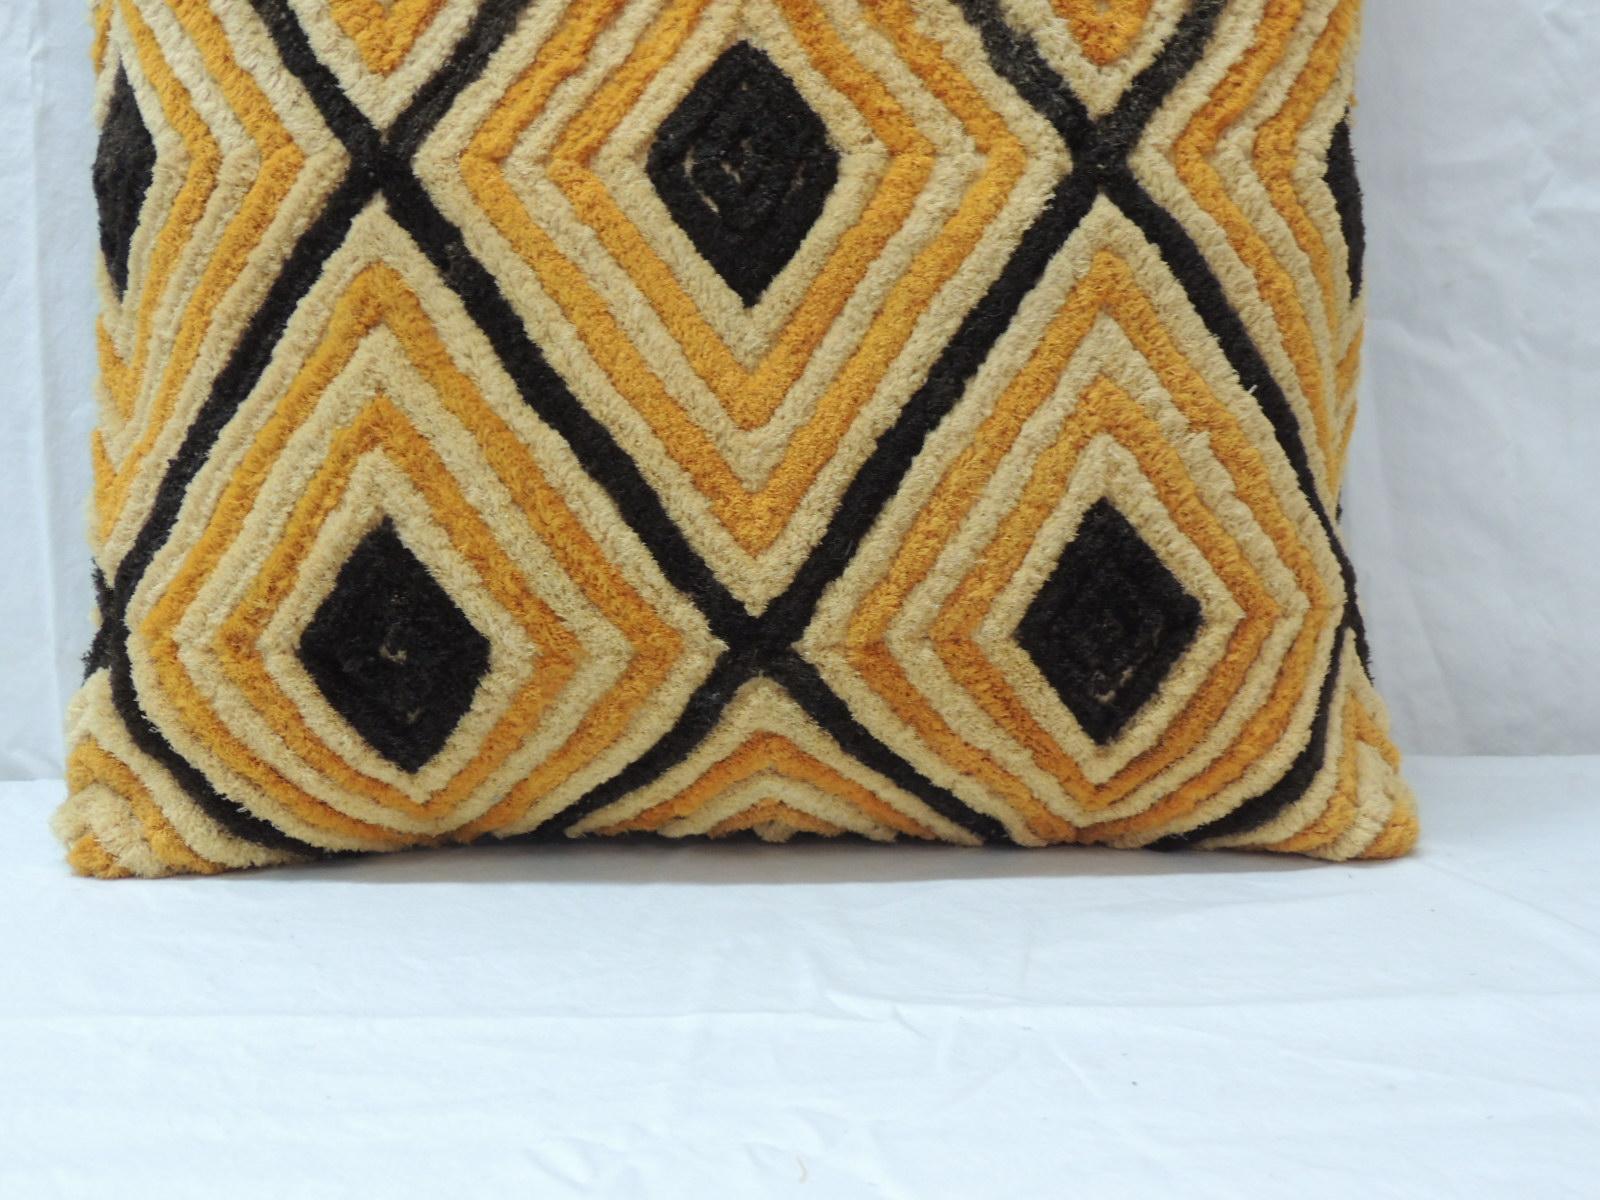 Light orange Raffia Velvet Kasai decorative pillow.
This graphic tribal pattern Kuba pillow is handcrafted in shades of dark orange and black. Intricately handwoven cut-pile by African tribe is backed with natural color linen. Decorative pillow